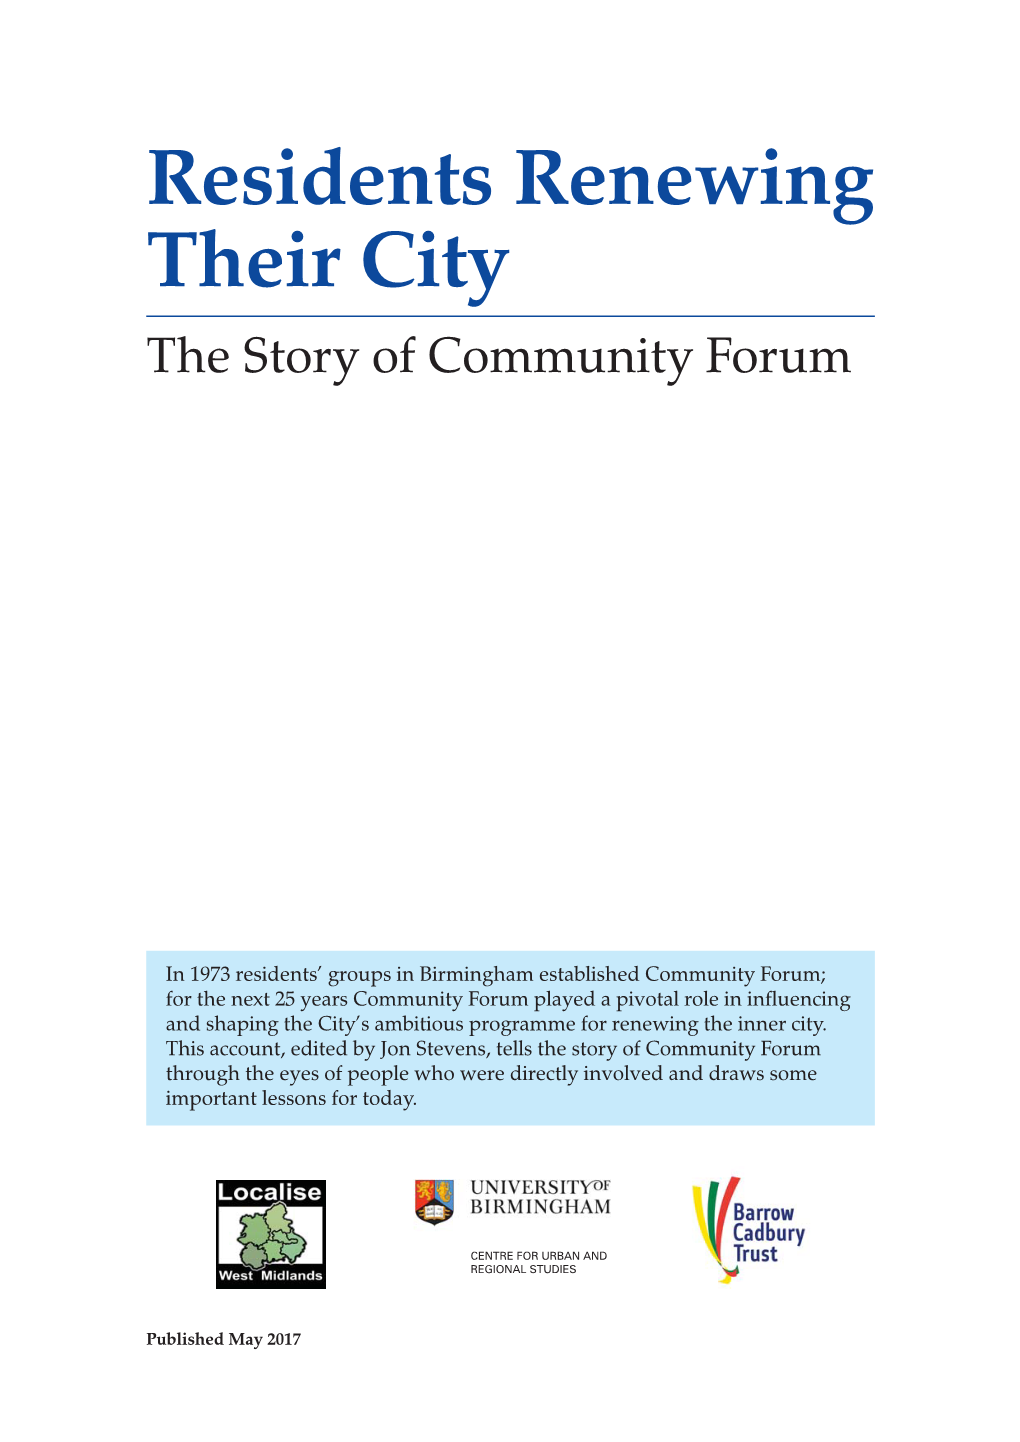 Residents Renewing Their City: the Story of Community Forum